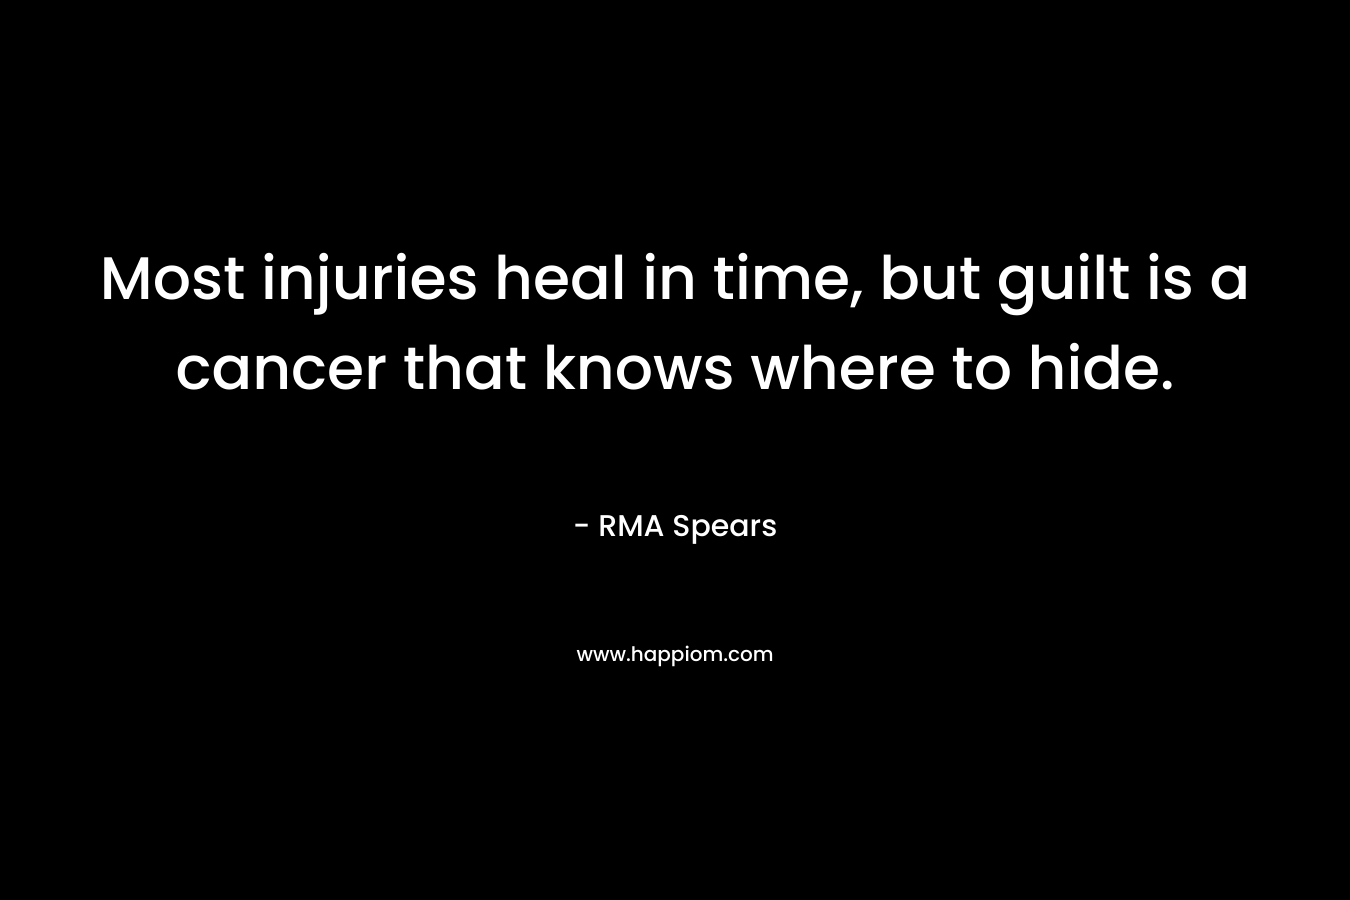 Most injuries heal in time, but guilt is a cancer that knows where to hide. – RMA Spears